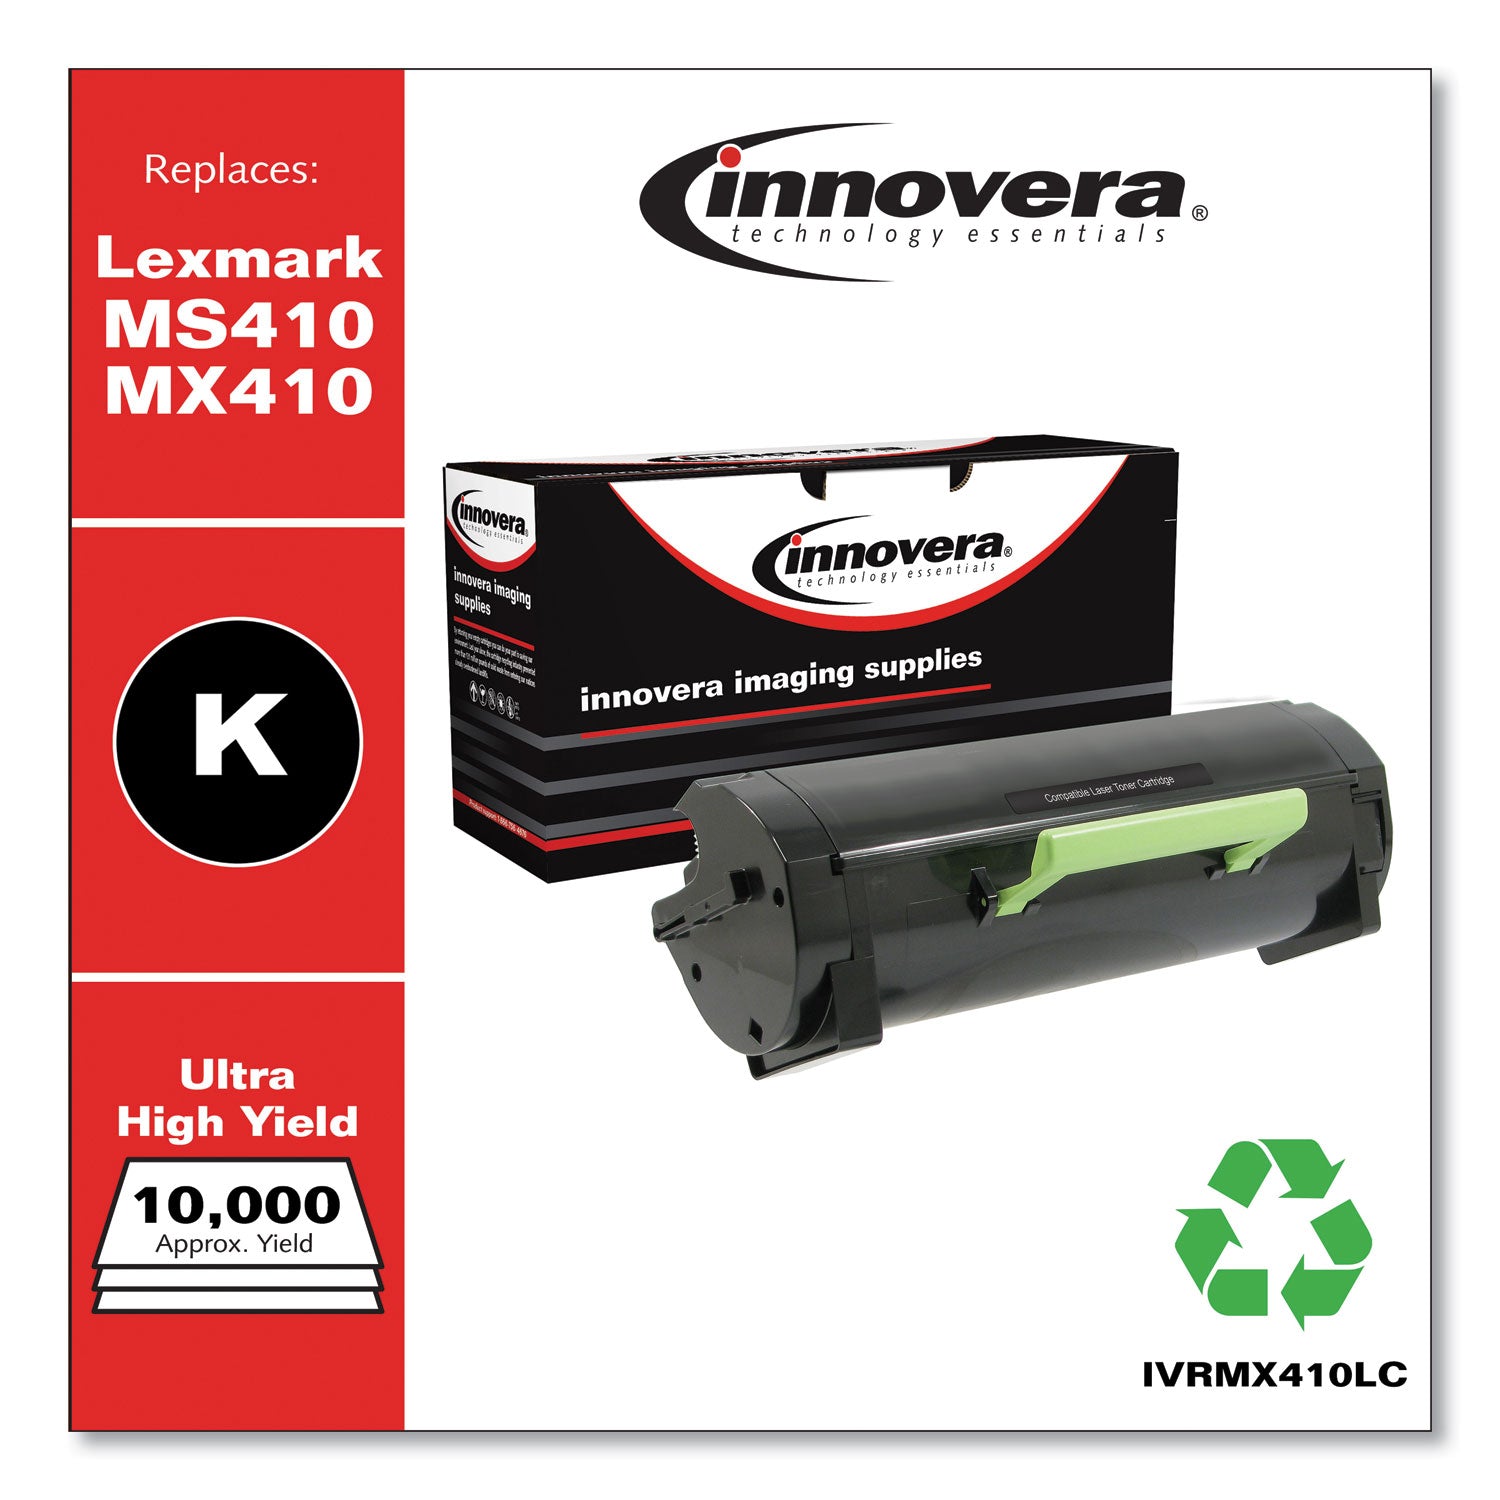 remanufactured-black-ultra-high-yield-toner-replacement-for-ms410-mx410-10000-page-yield_ivrmx410lc - 2